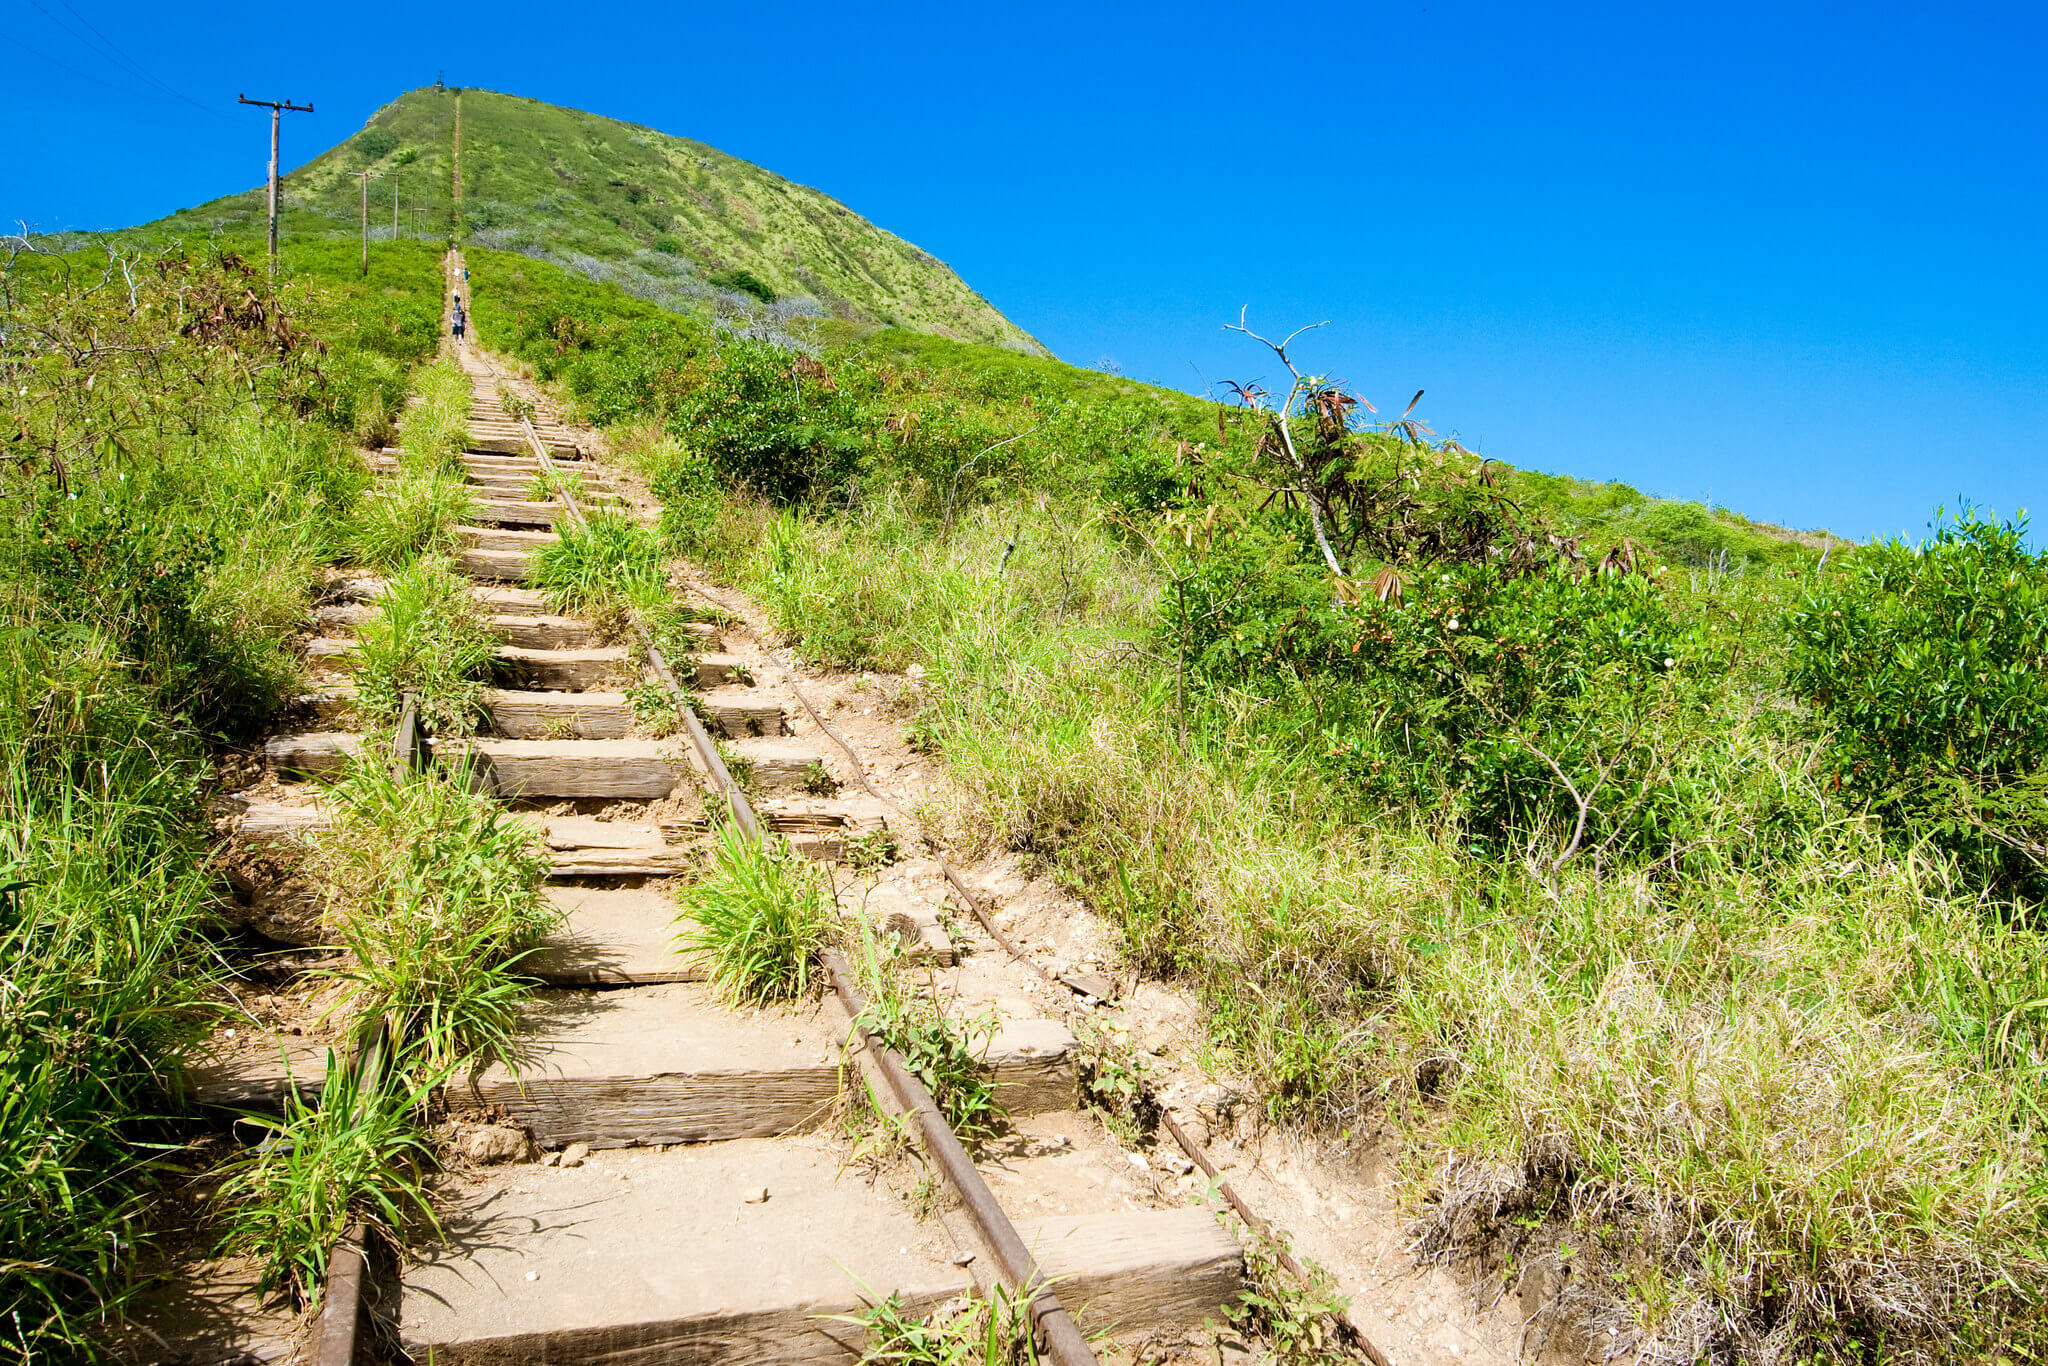 the Koko Head directions up the stairs of doom